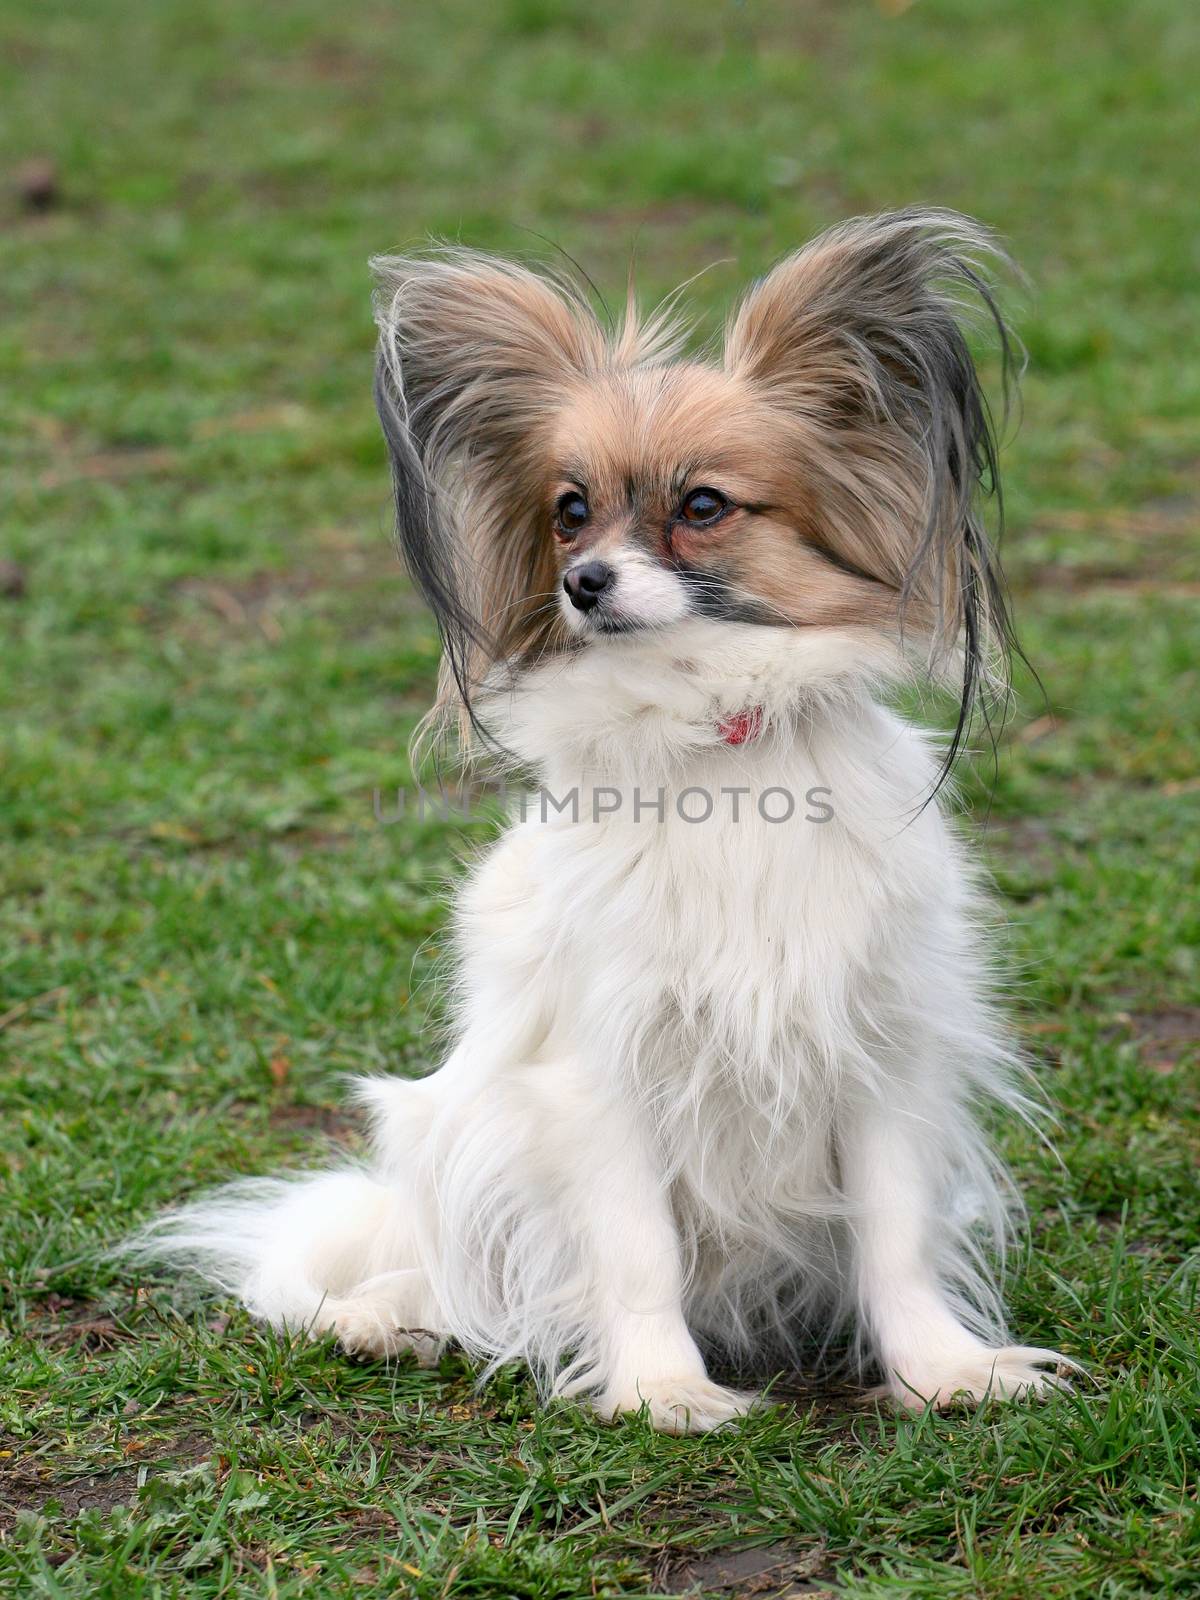 Typical Young Papillon dog - Continental Toy Spaniel - in the garden